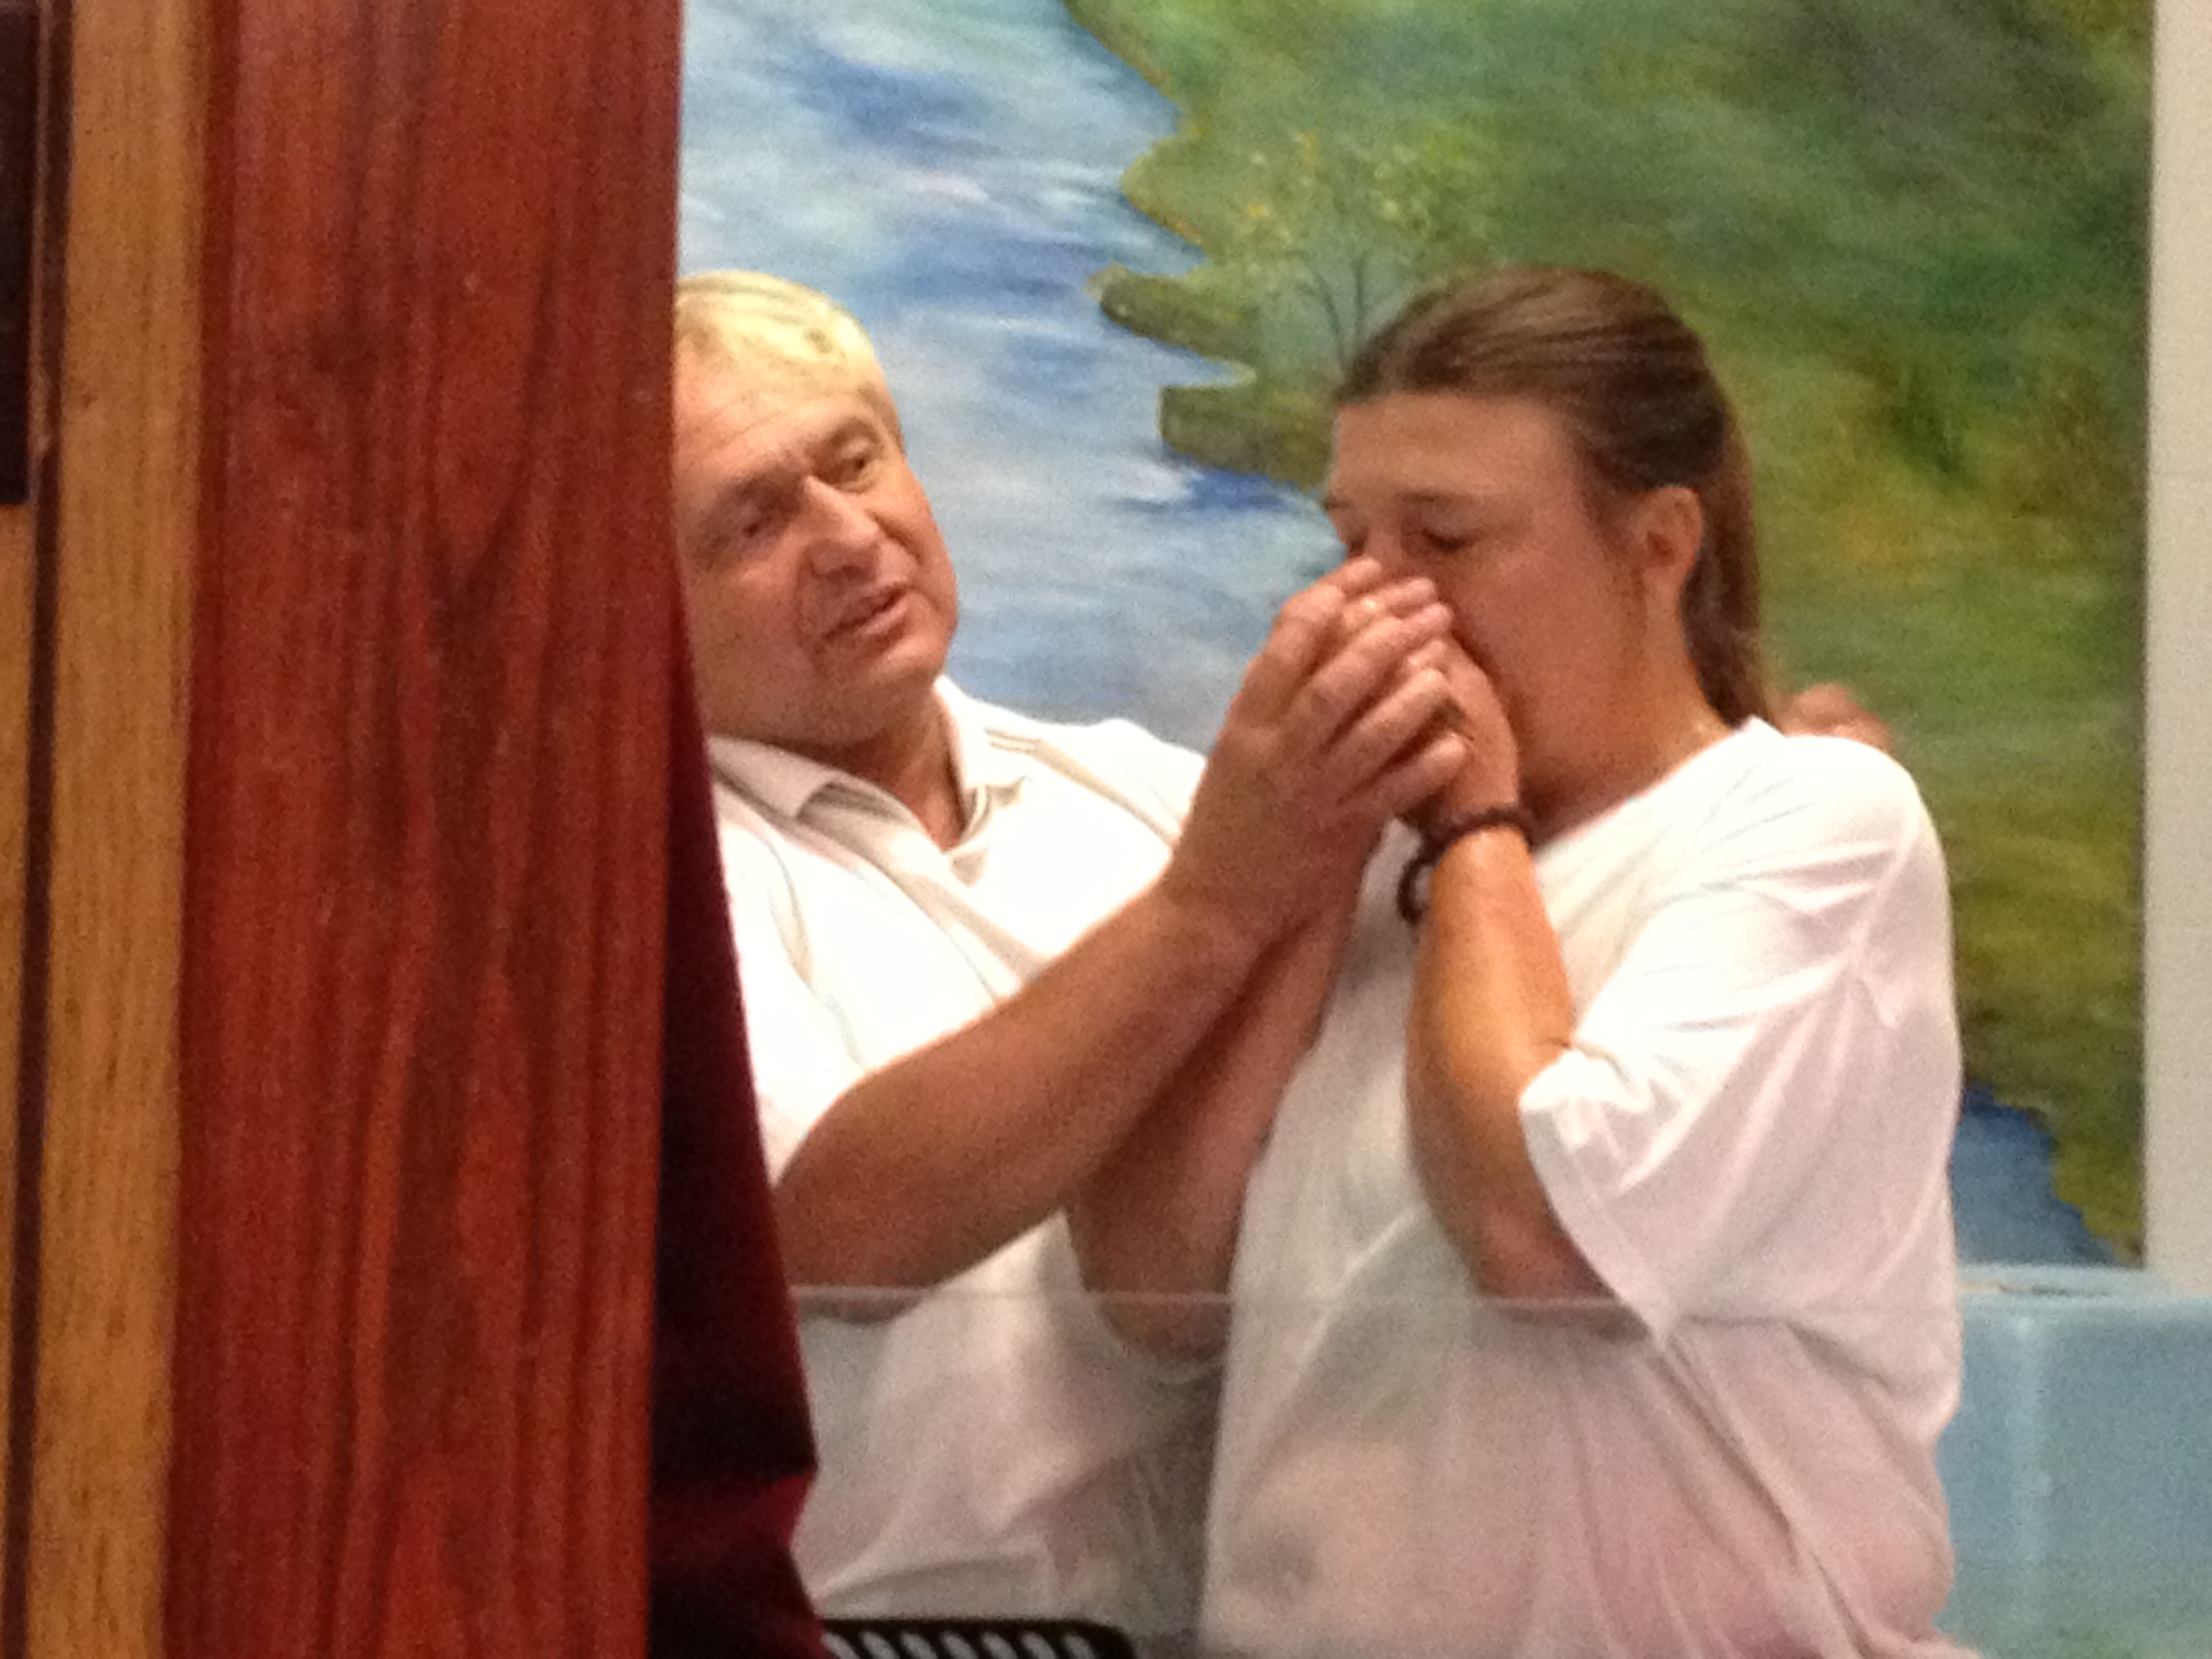 Baptism of Patricia Obright - Aug 28, 2013